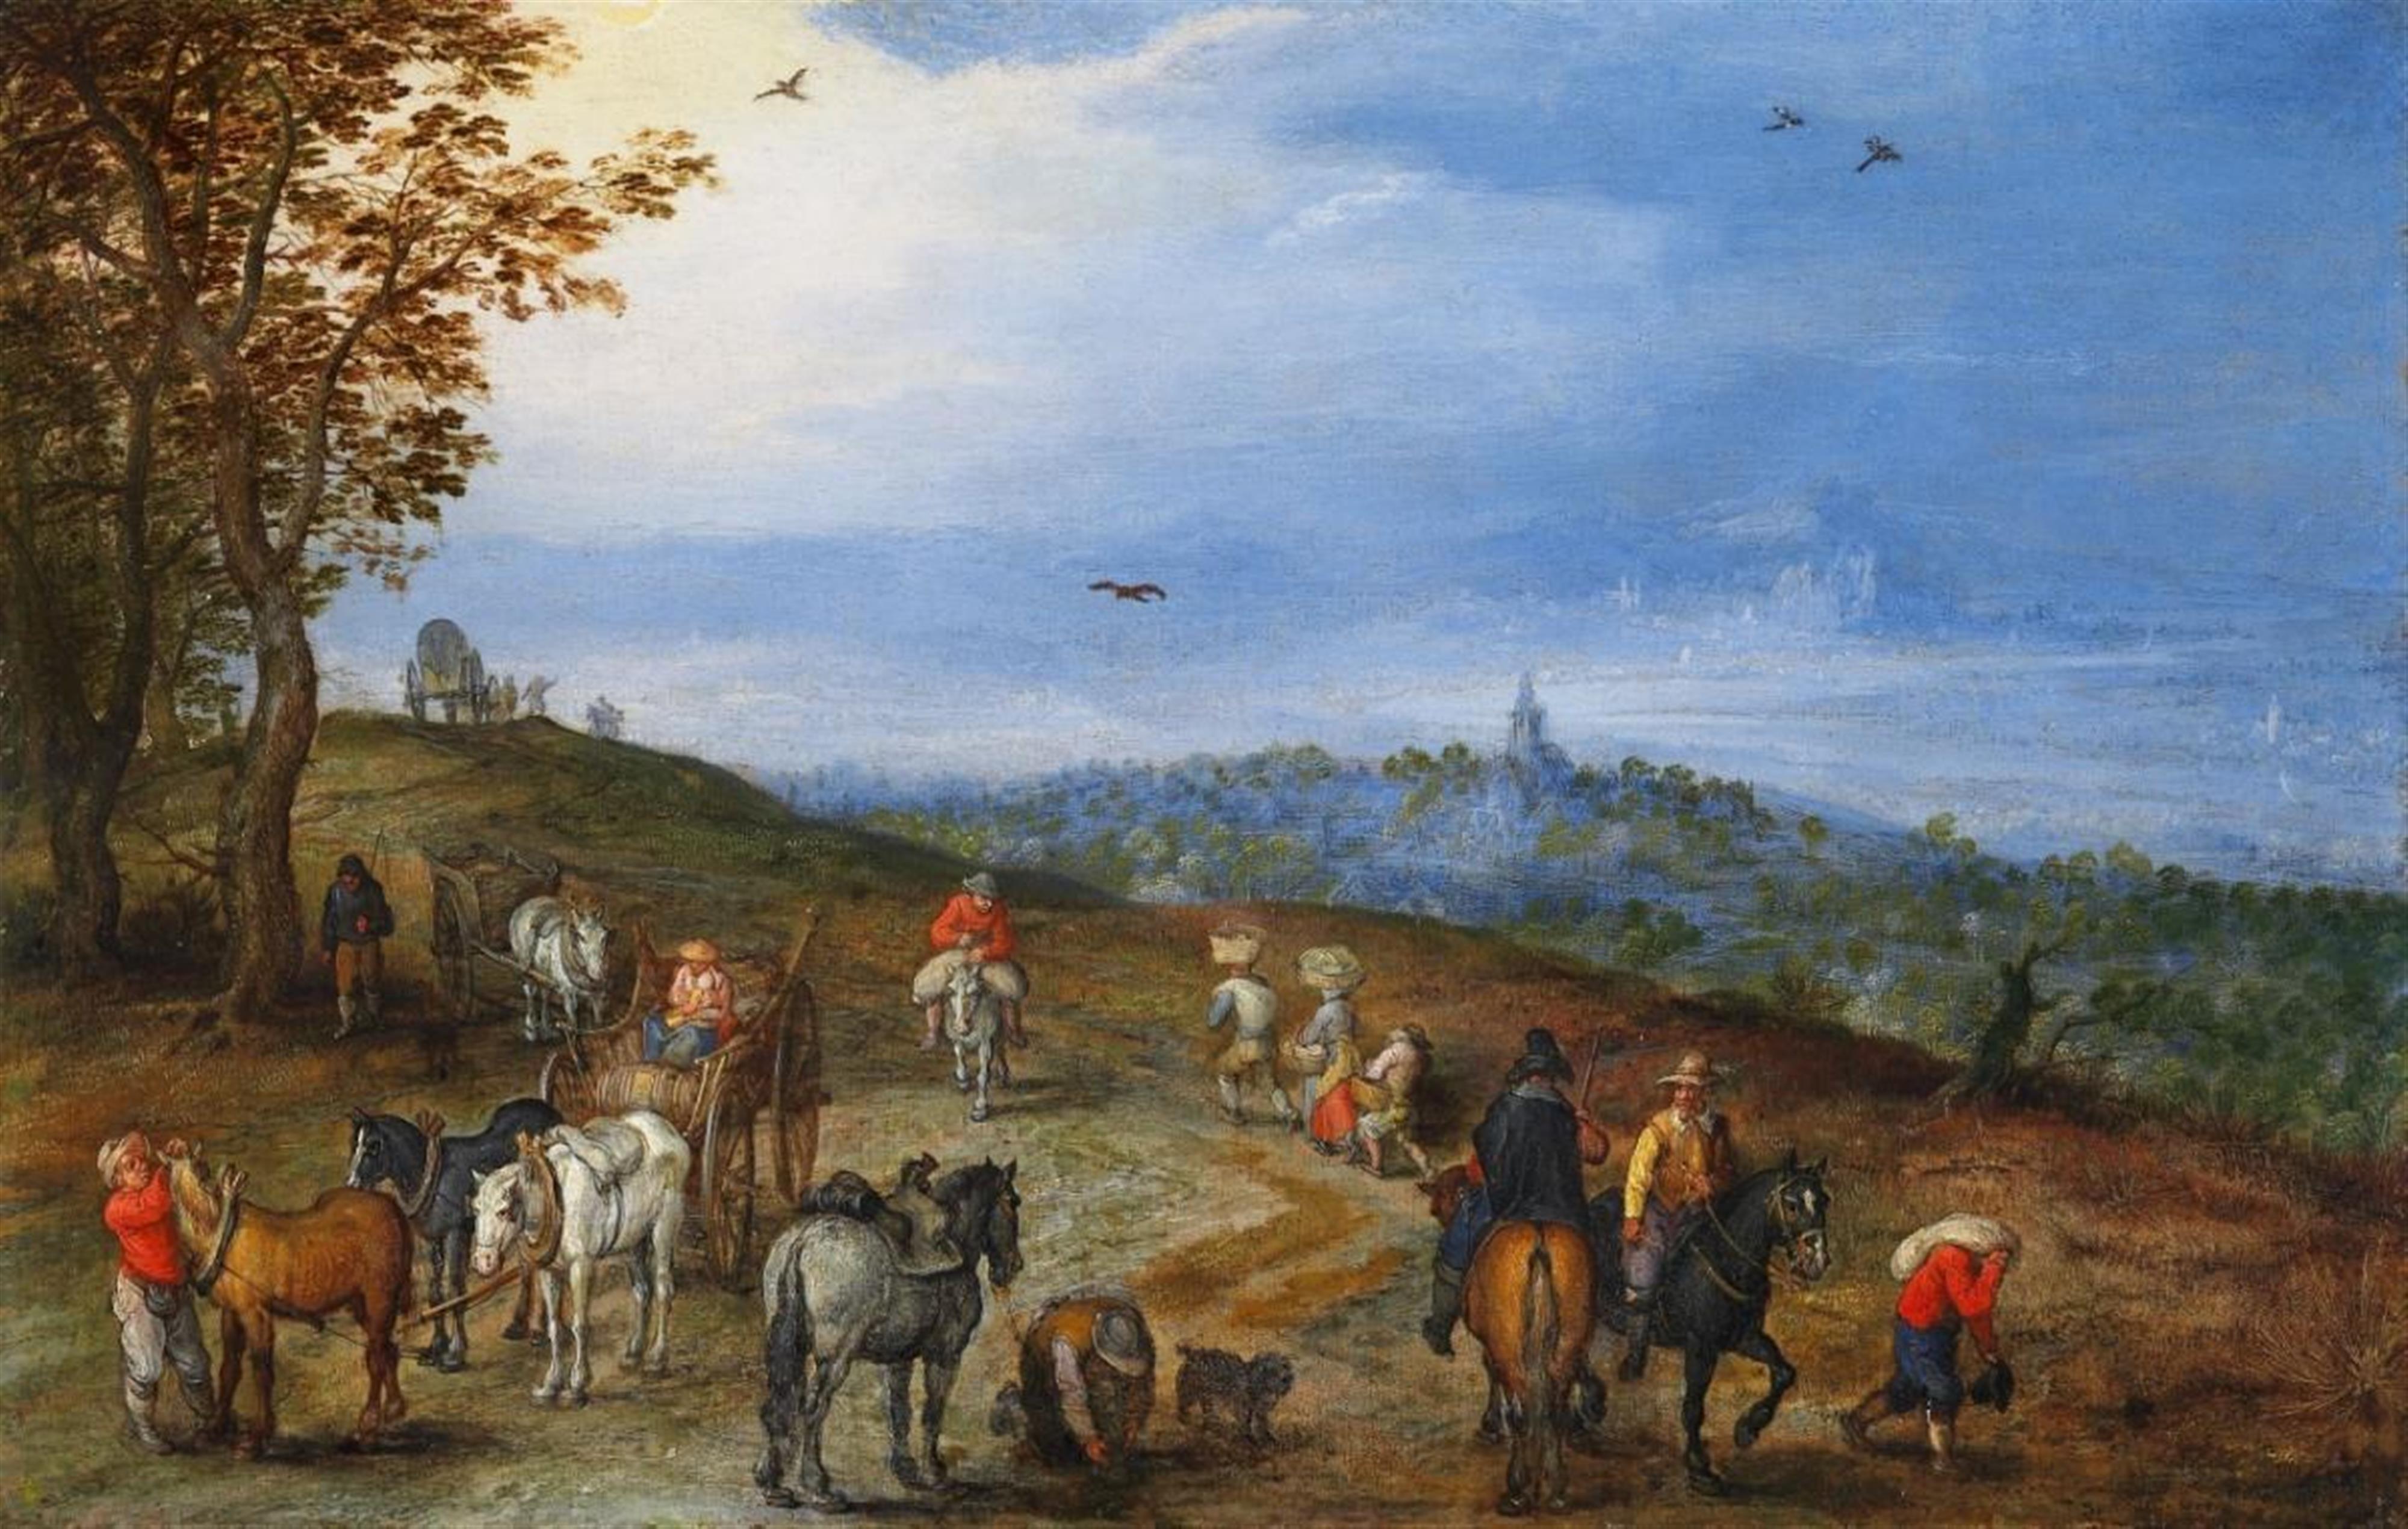 Jan Brueghel the Elder - WIDE LANDSCAPE WITH CART, RIDERS AND WANDERERS - image-1